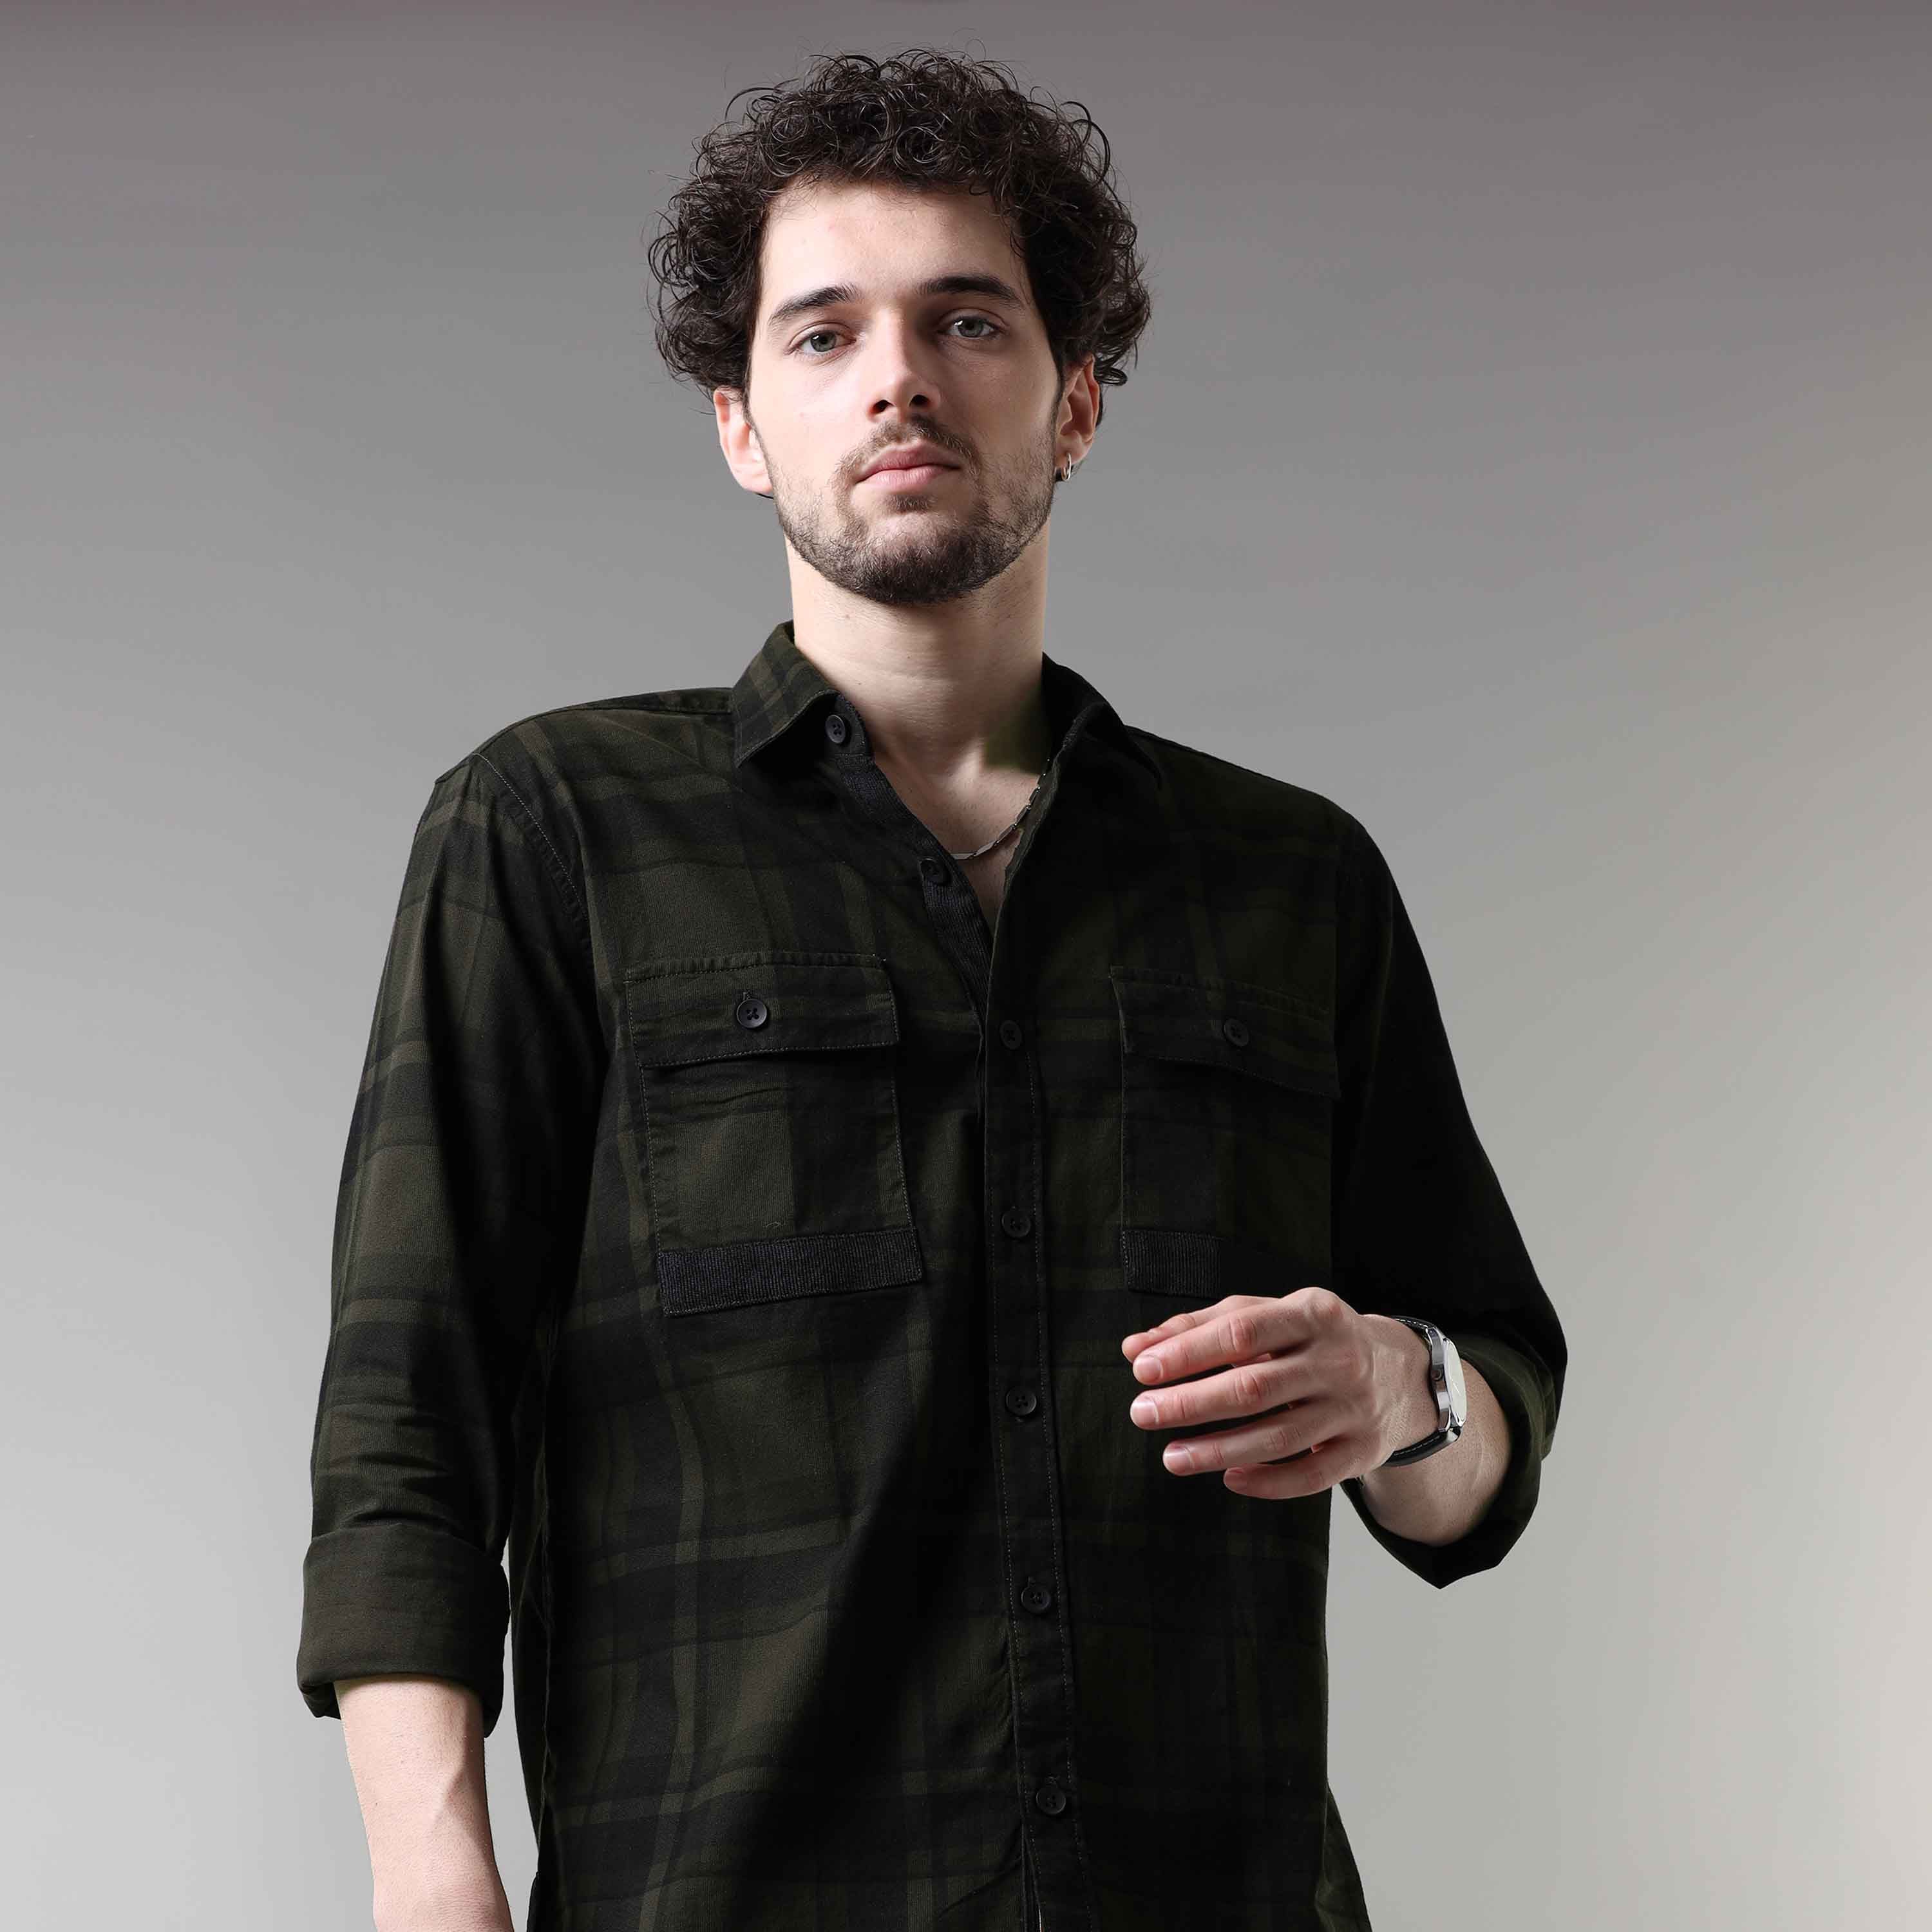 Shop Latest Green And Black Check Shirt OnlineRs. 1399.00